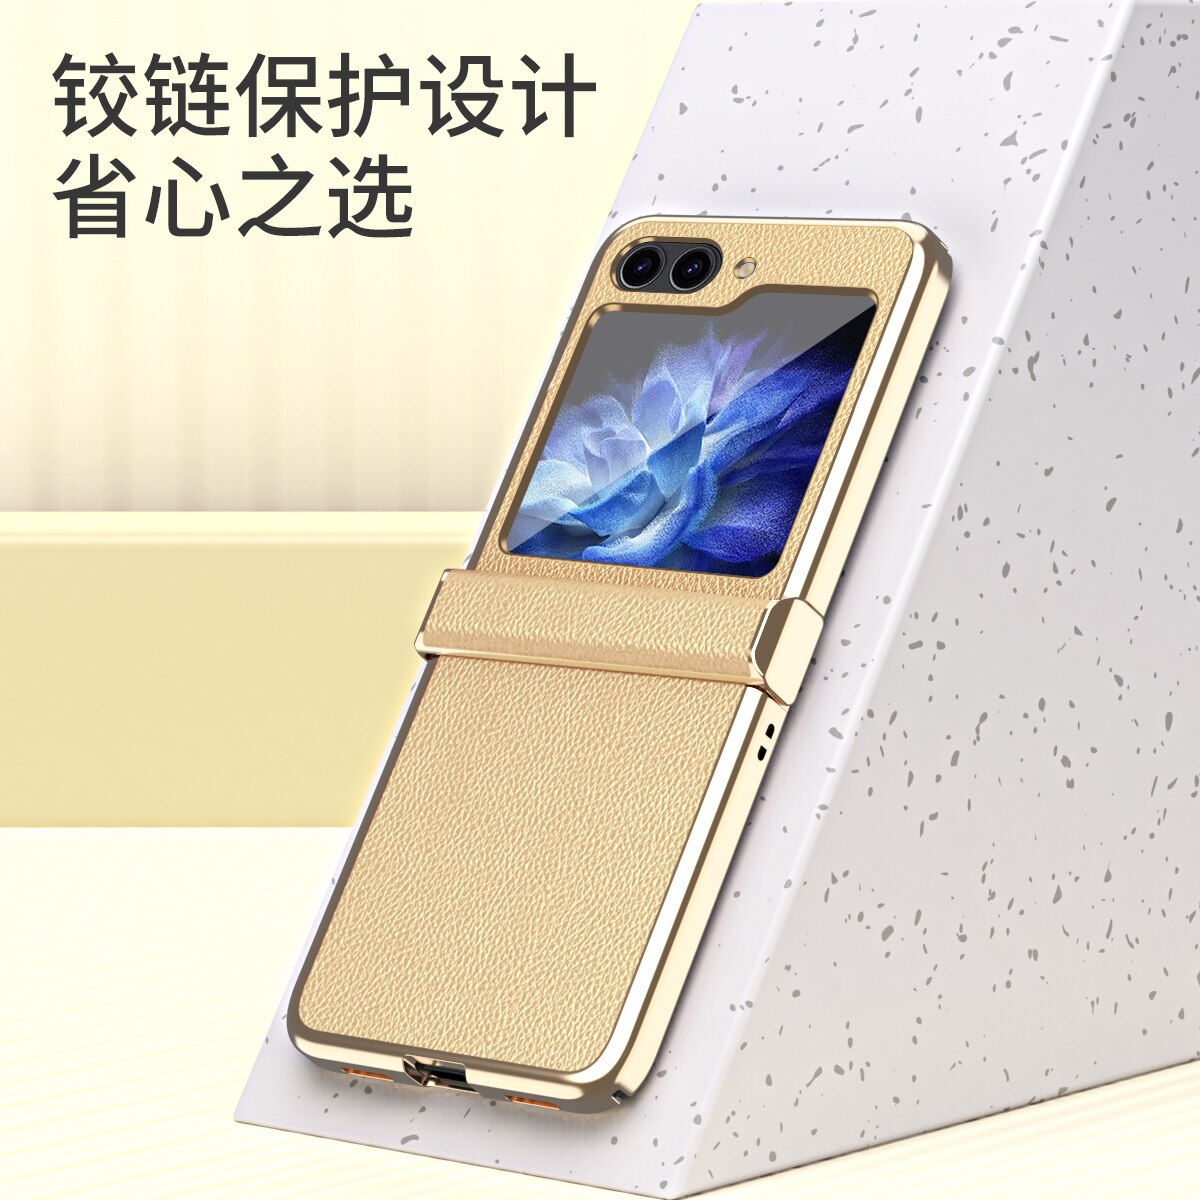 For Z Flip 5 Mobile Phone Case Folding Screen Electroplated Plain